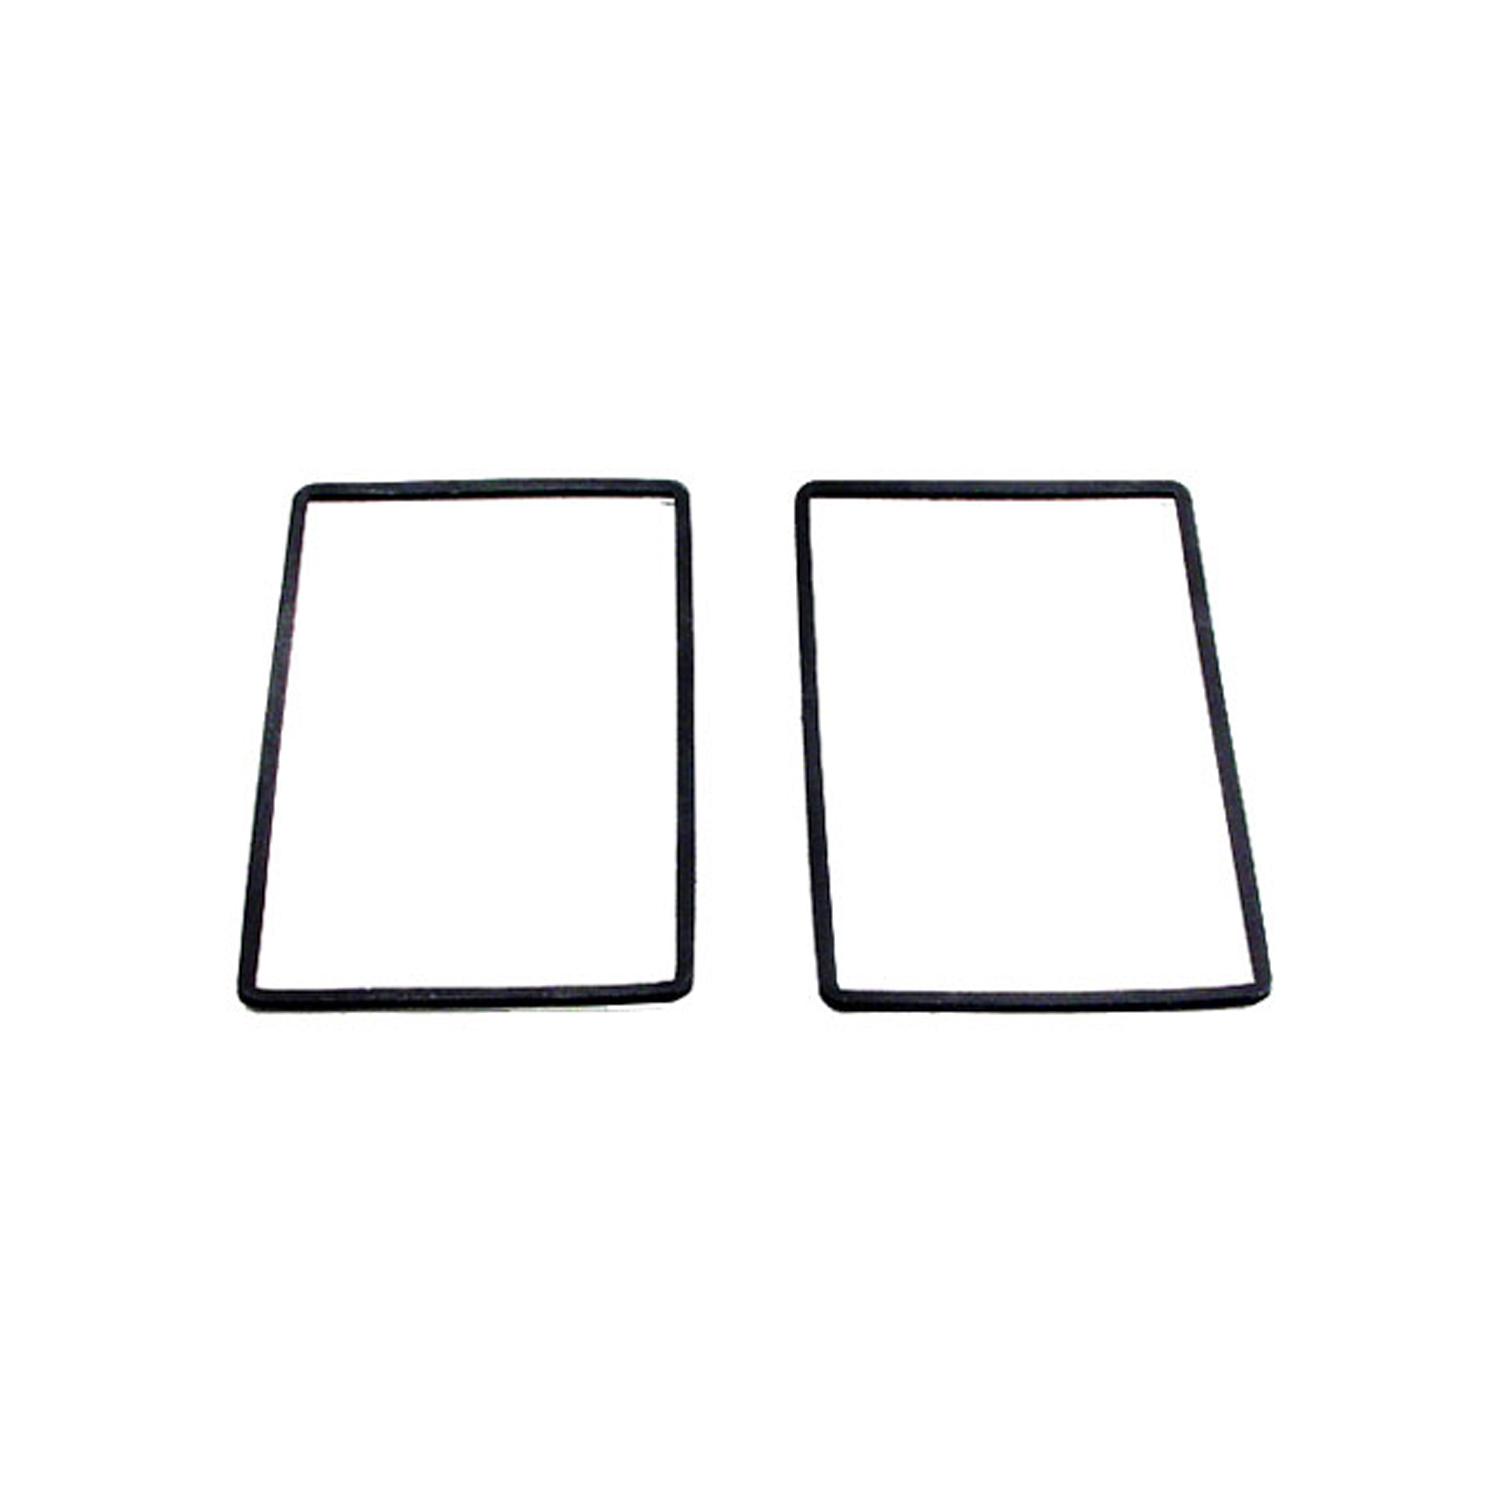 1955 Willys Station Wagon Tail-light Bezel Lens Gaskets.  2-3/4 X 2-5/16.  Pair-LG 9600-120